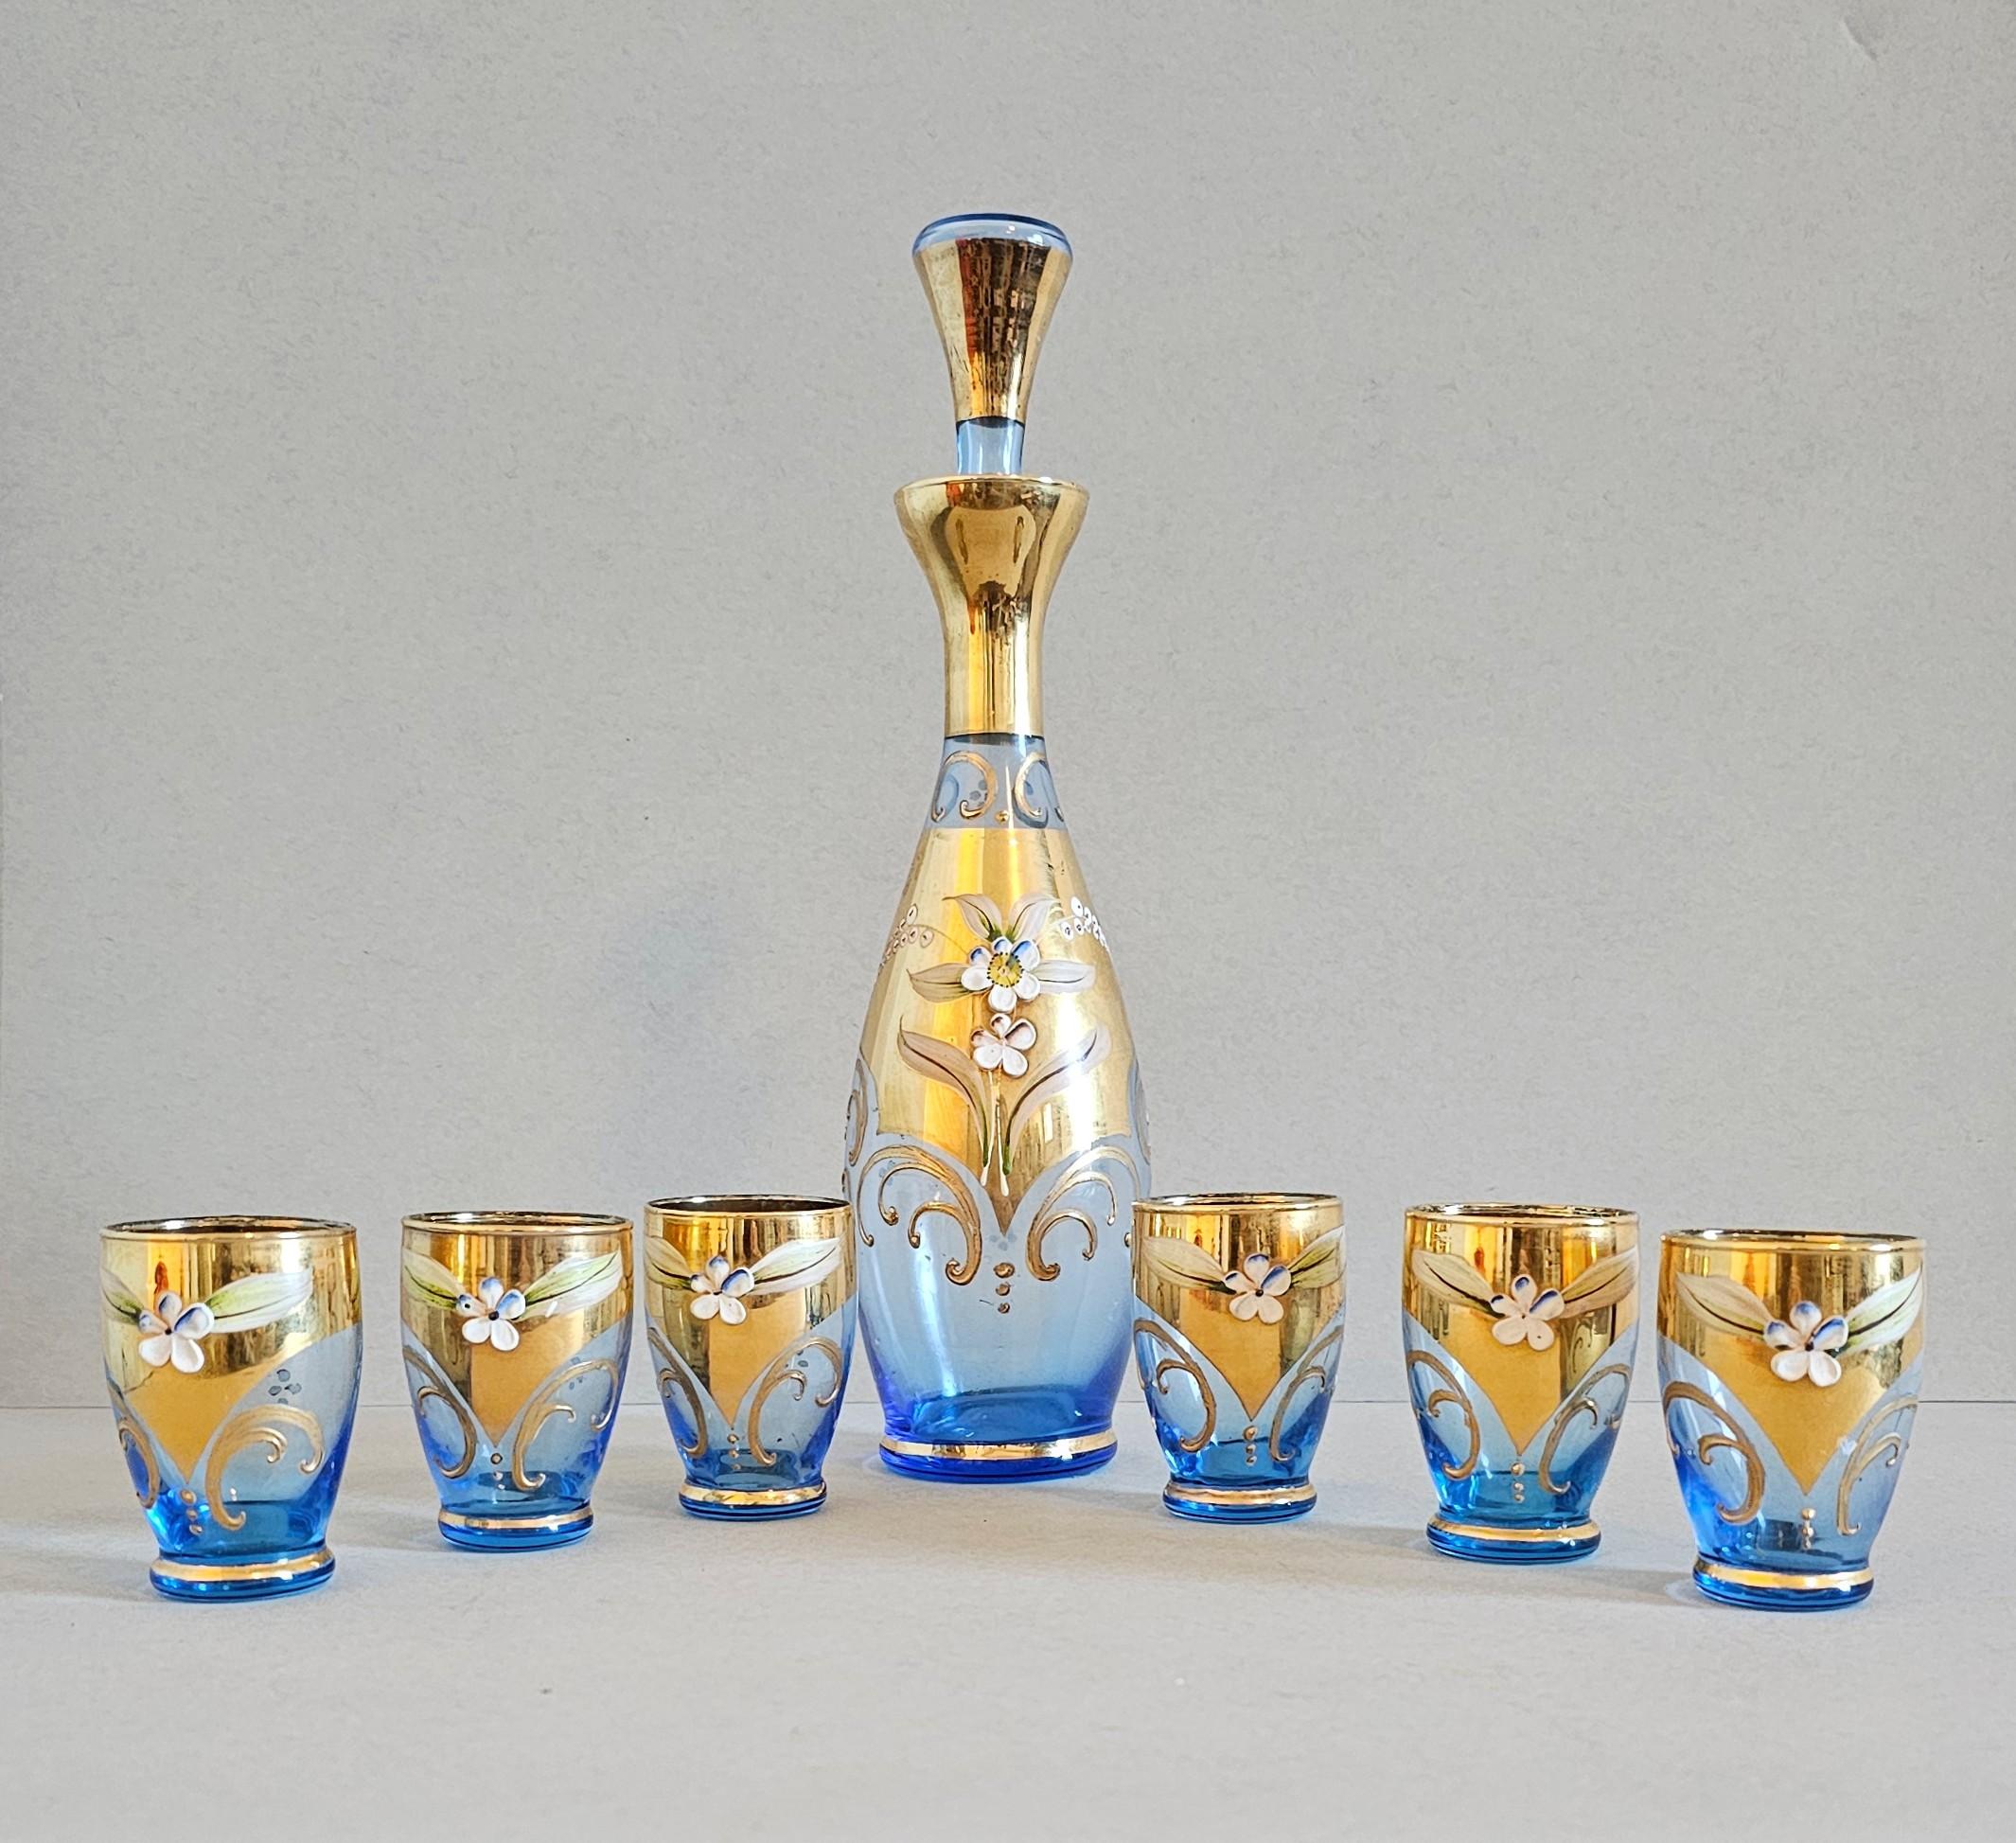 Elevate any bar cart, liquor cabinet, or barware collection with this stunning hand-blown Murano art glass liqueur set by Salviati & Co.

Hand-crafted in Venice, Italy, mid-century, featuring beautiful sky blue glass with brilliant parcel gilt trim